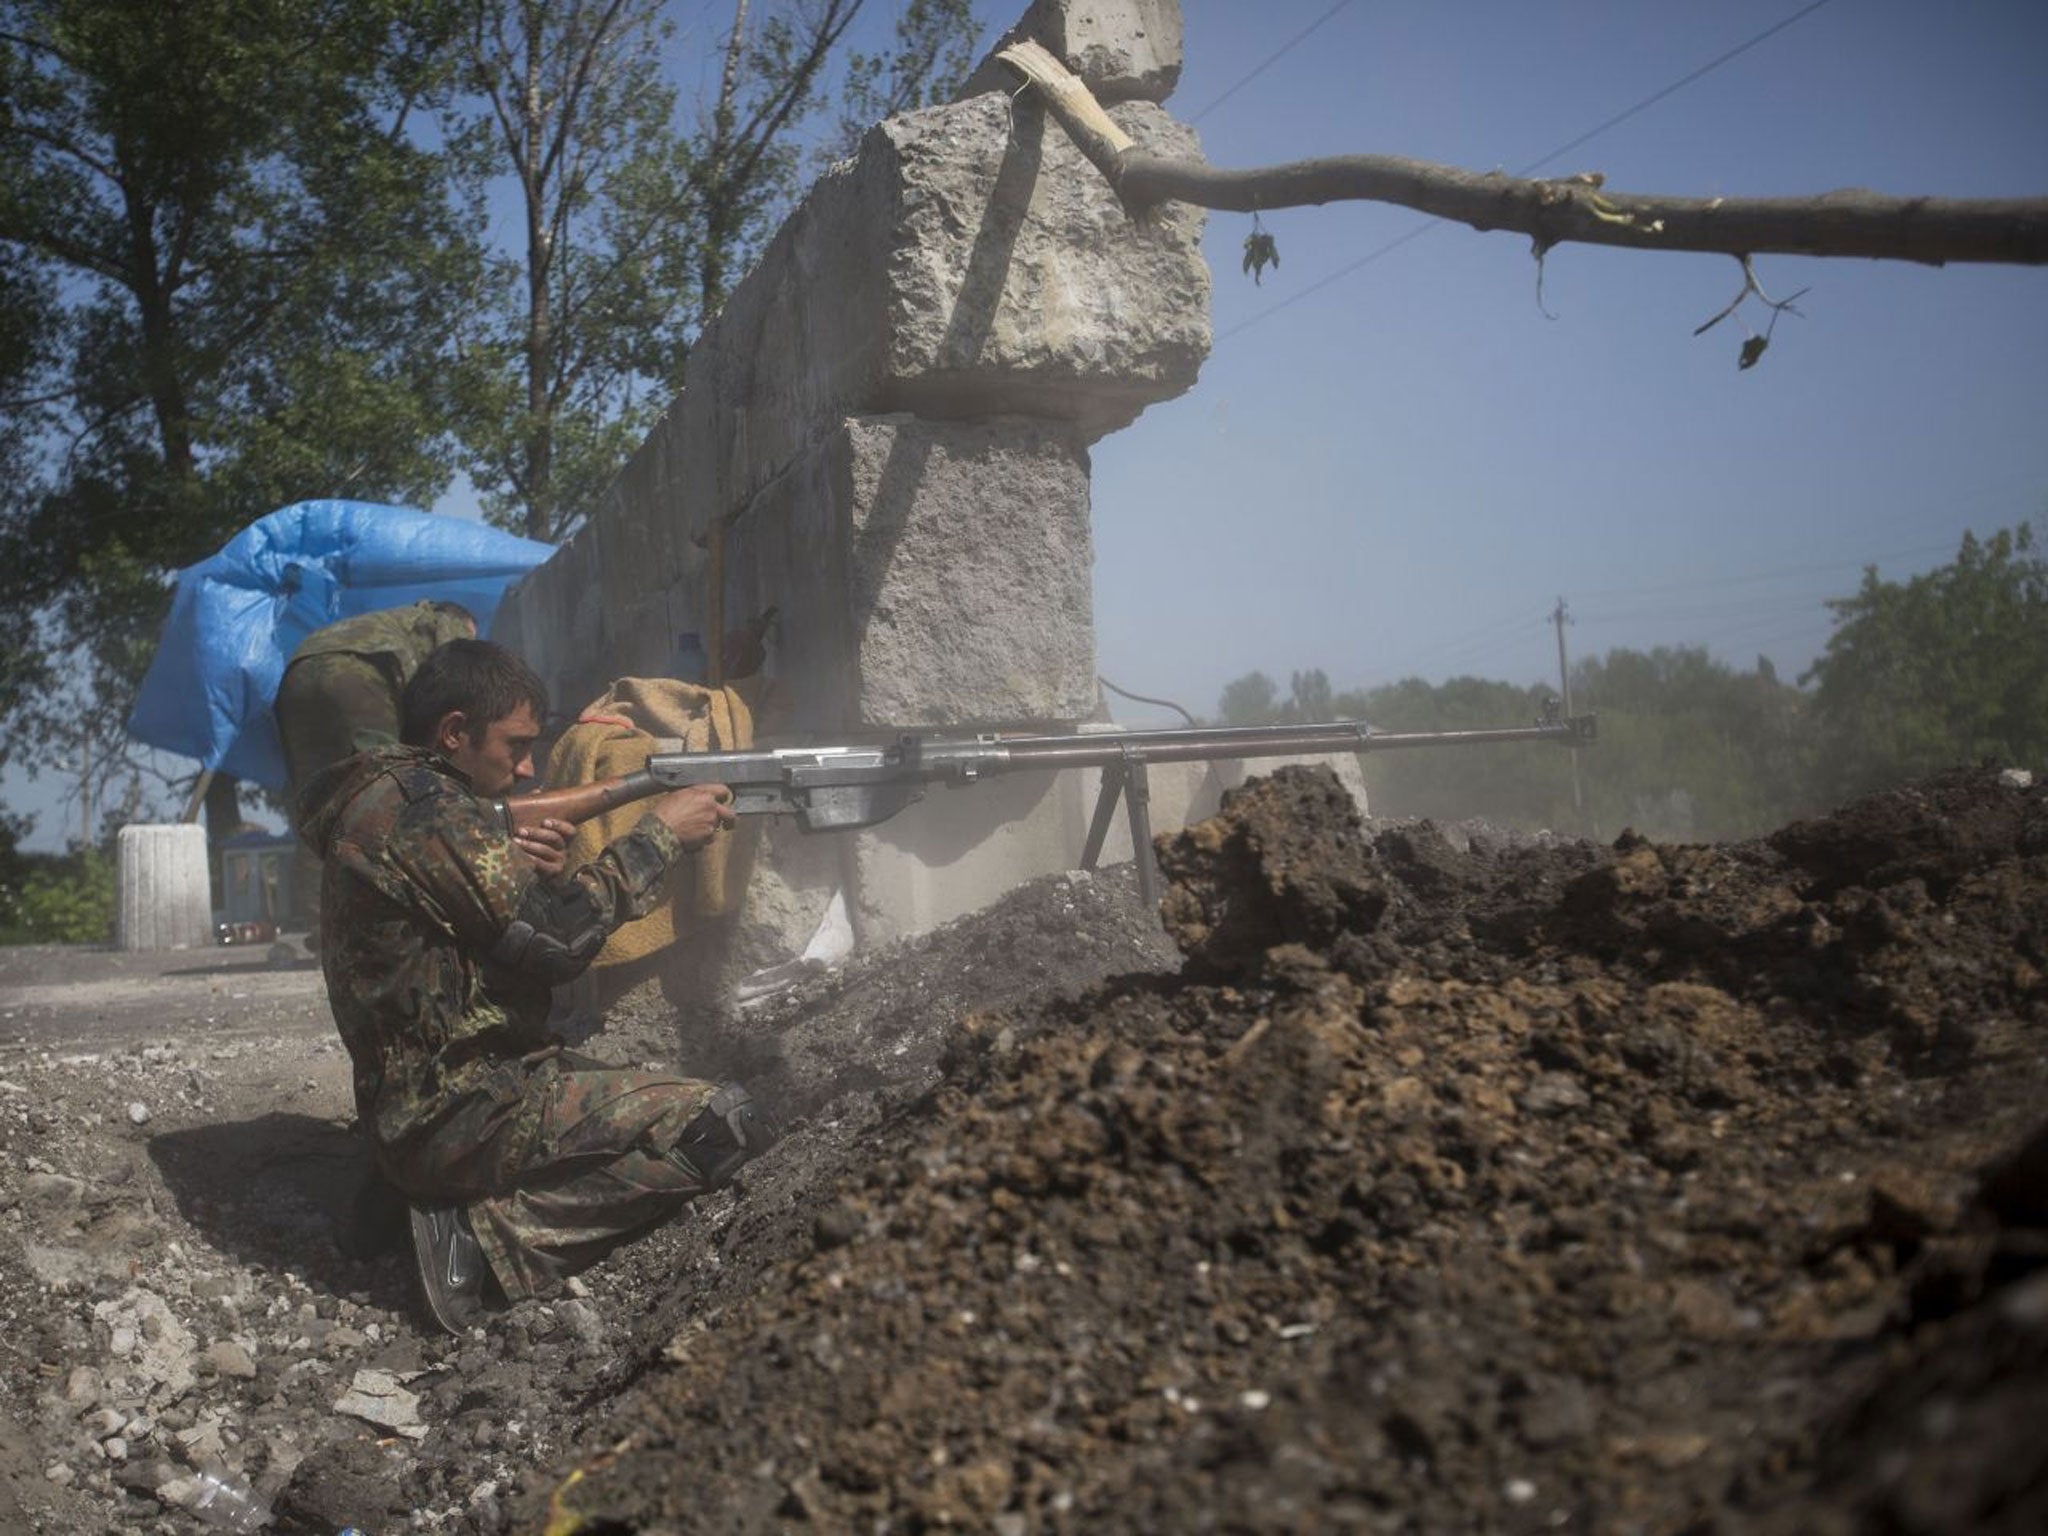 A pro-Russian militant test-fires an anti-tank weapon preparing to fight against Ukrainian government troops at a checkpoint blocking the major highway which links Kharkiv, outside Slovyansk, eastern Ukraine